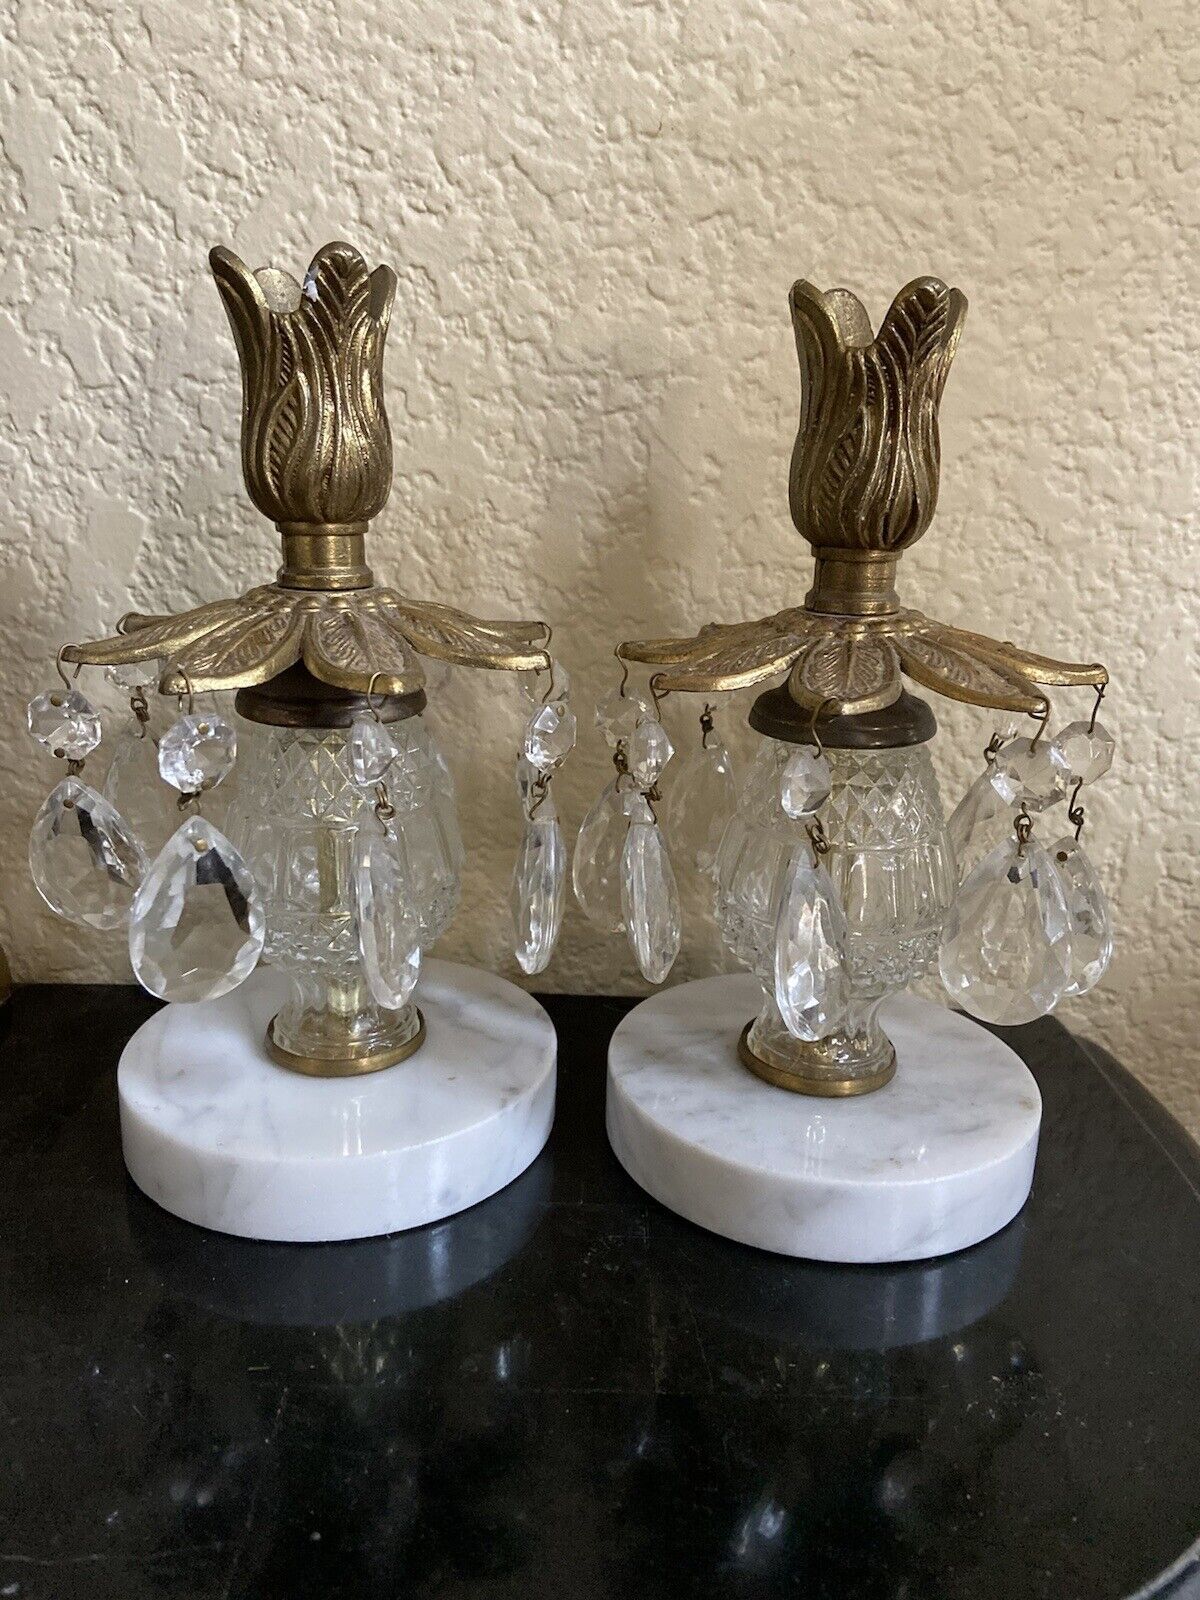 Vintage Set Of 2 Marble Brass Glass Candle Holders With Hanging Crystal Prisms | eBay US